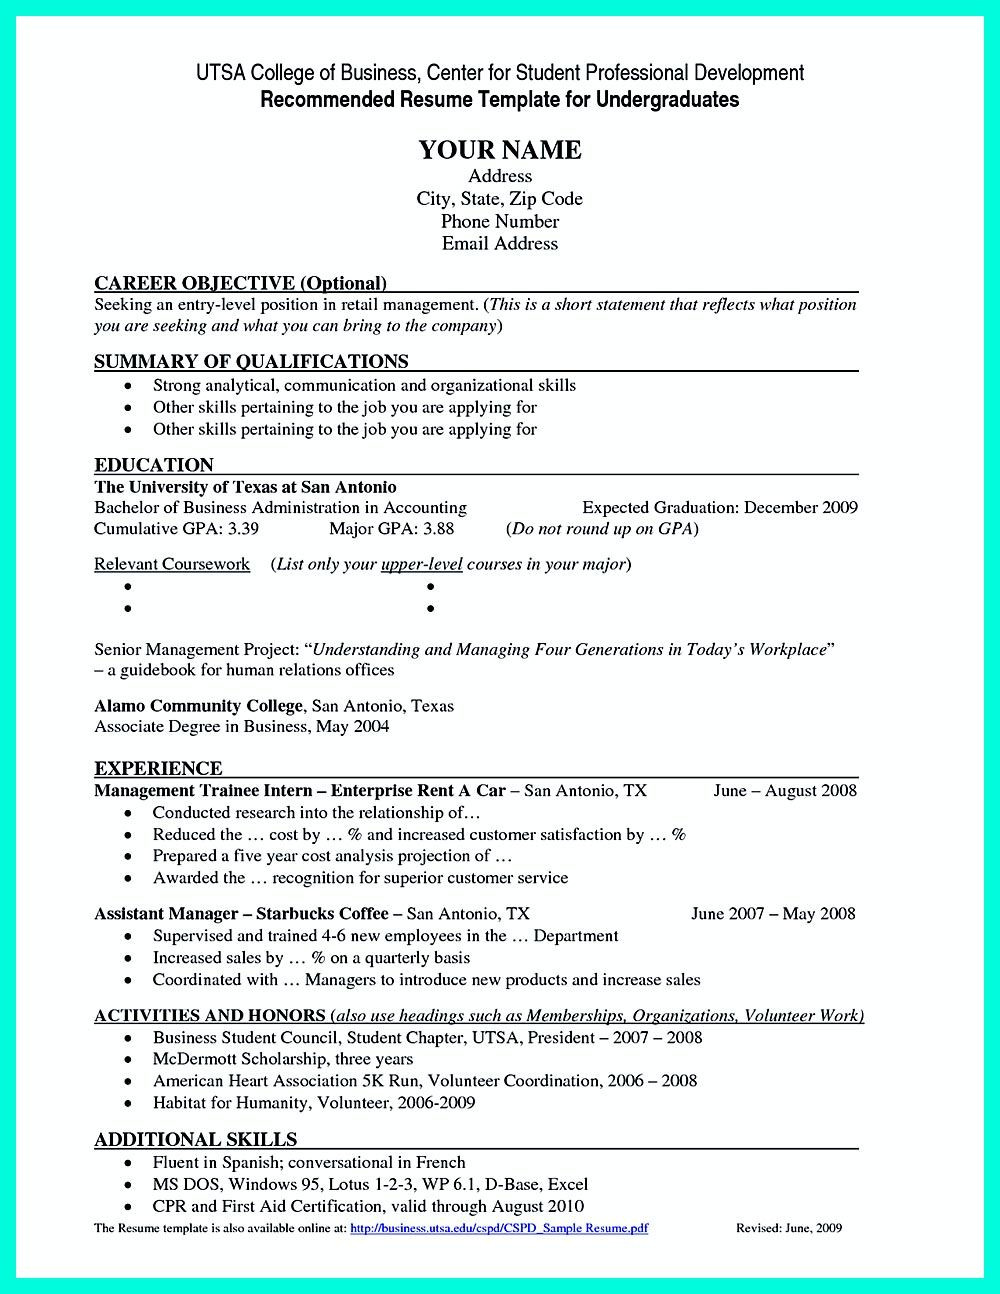 Sample Resume for Fresh Graduates with No Experience Best Current College Student Resume with No Experience Job …